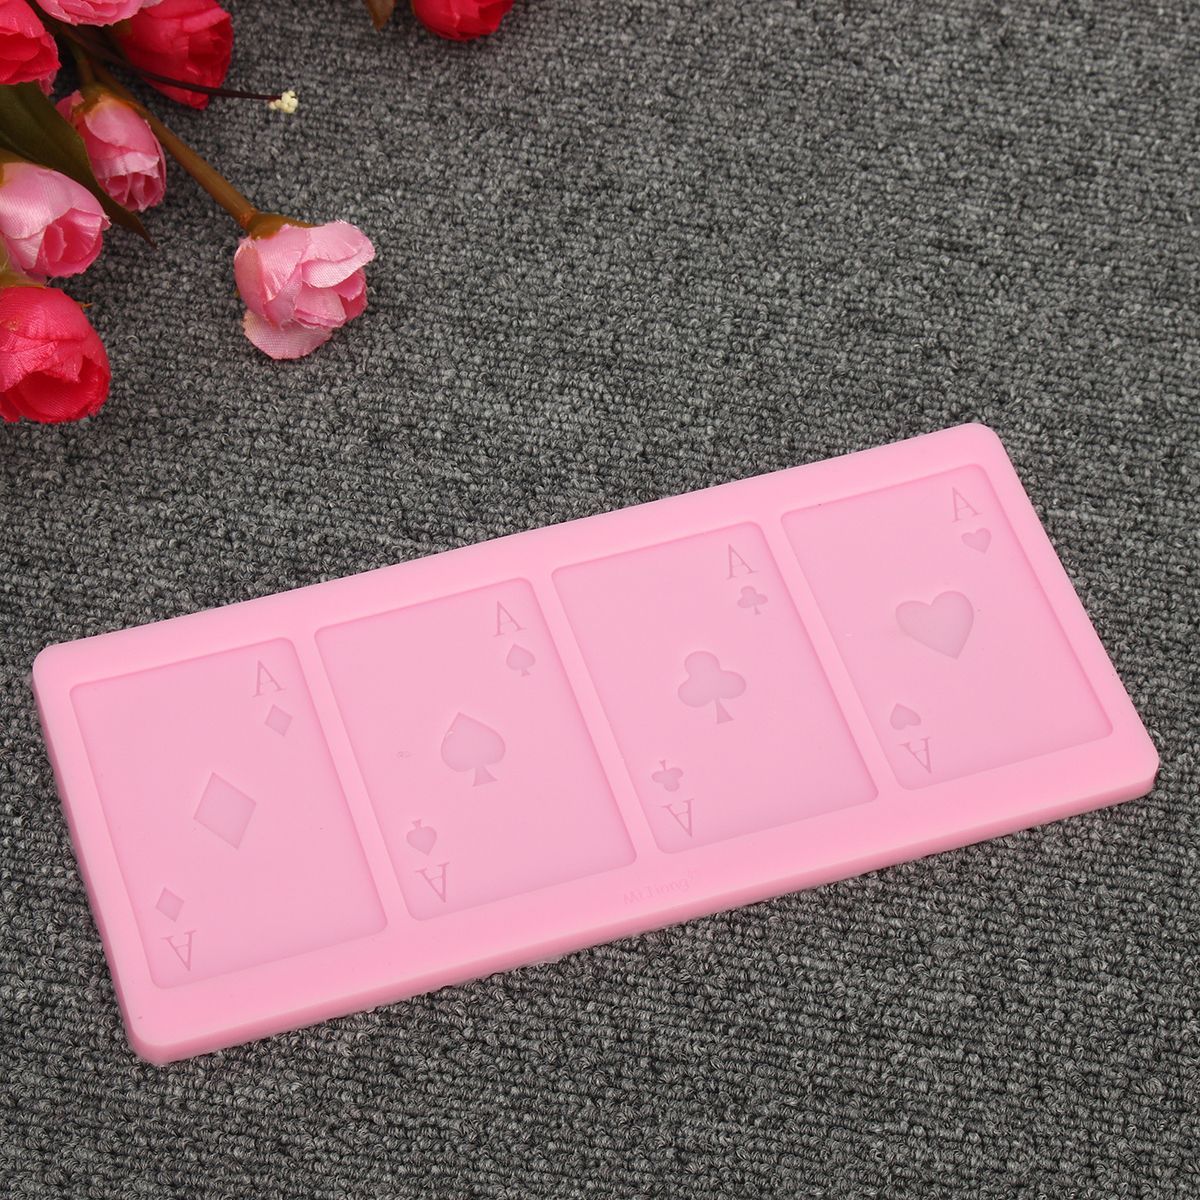 Poker-Shape-Silicone-Chocolate-Cake-Mold-A-Poker-Card-Fondant-Candy-Baking-Mould-Decorations-1155552